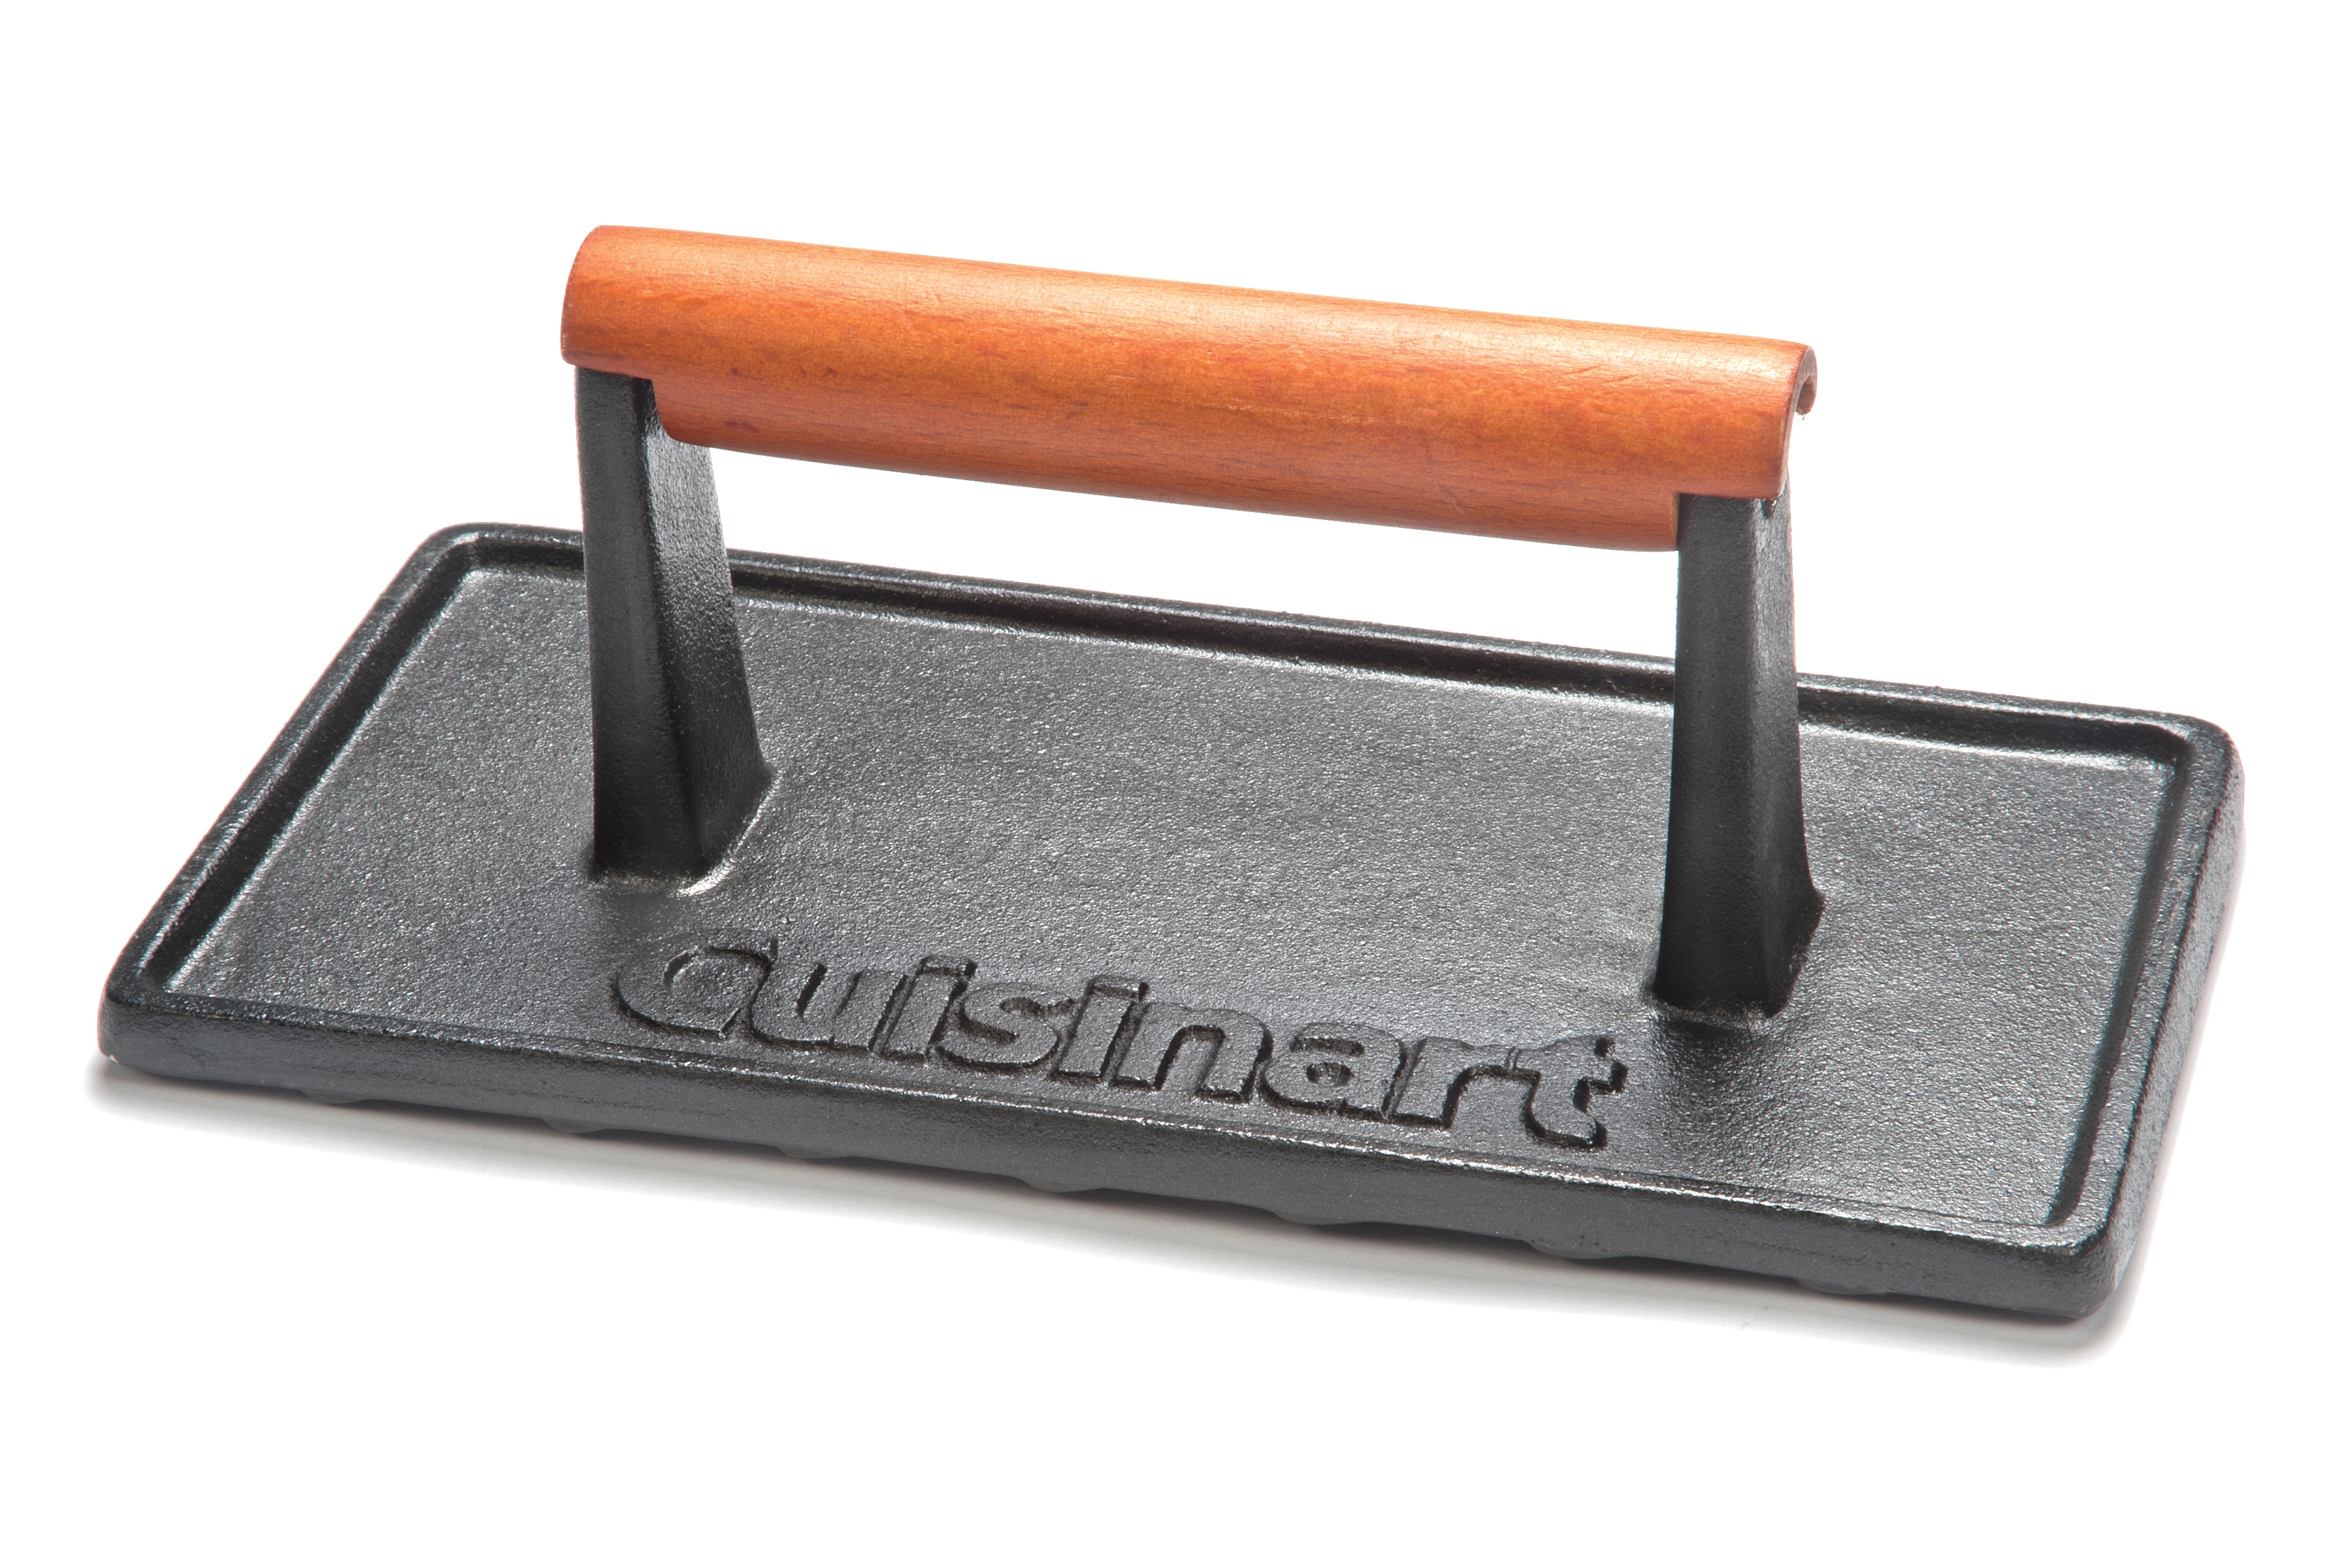 https://www.momjunction.com/wp-content/uploads/product-images/cuisinart-cast-iron-grill-press-cgpr-221_afl620.jpg